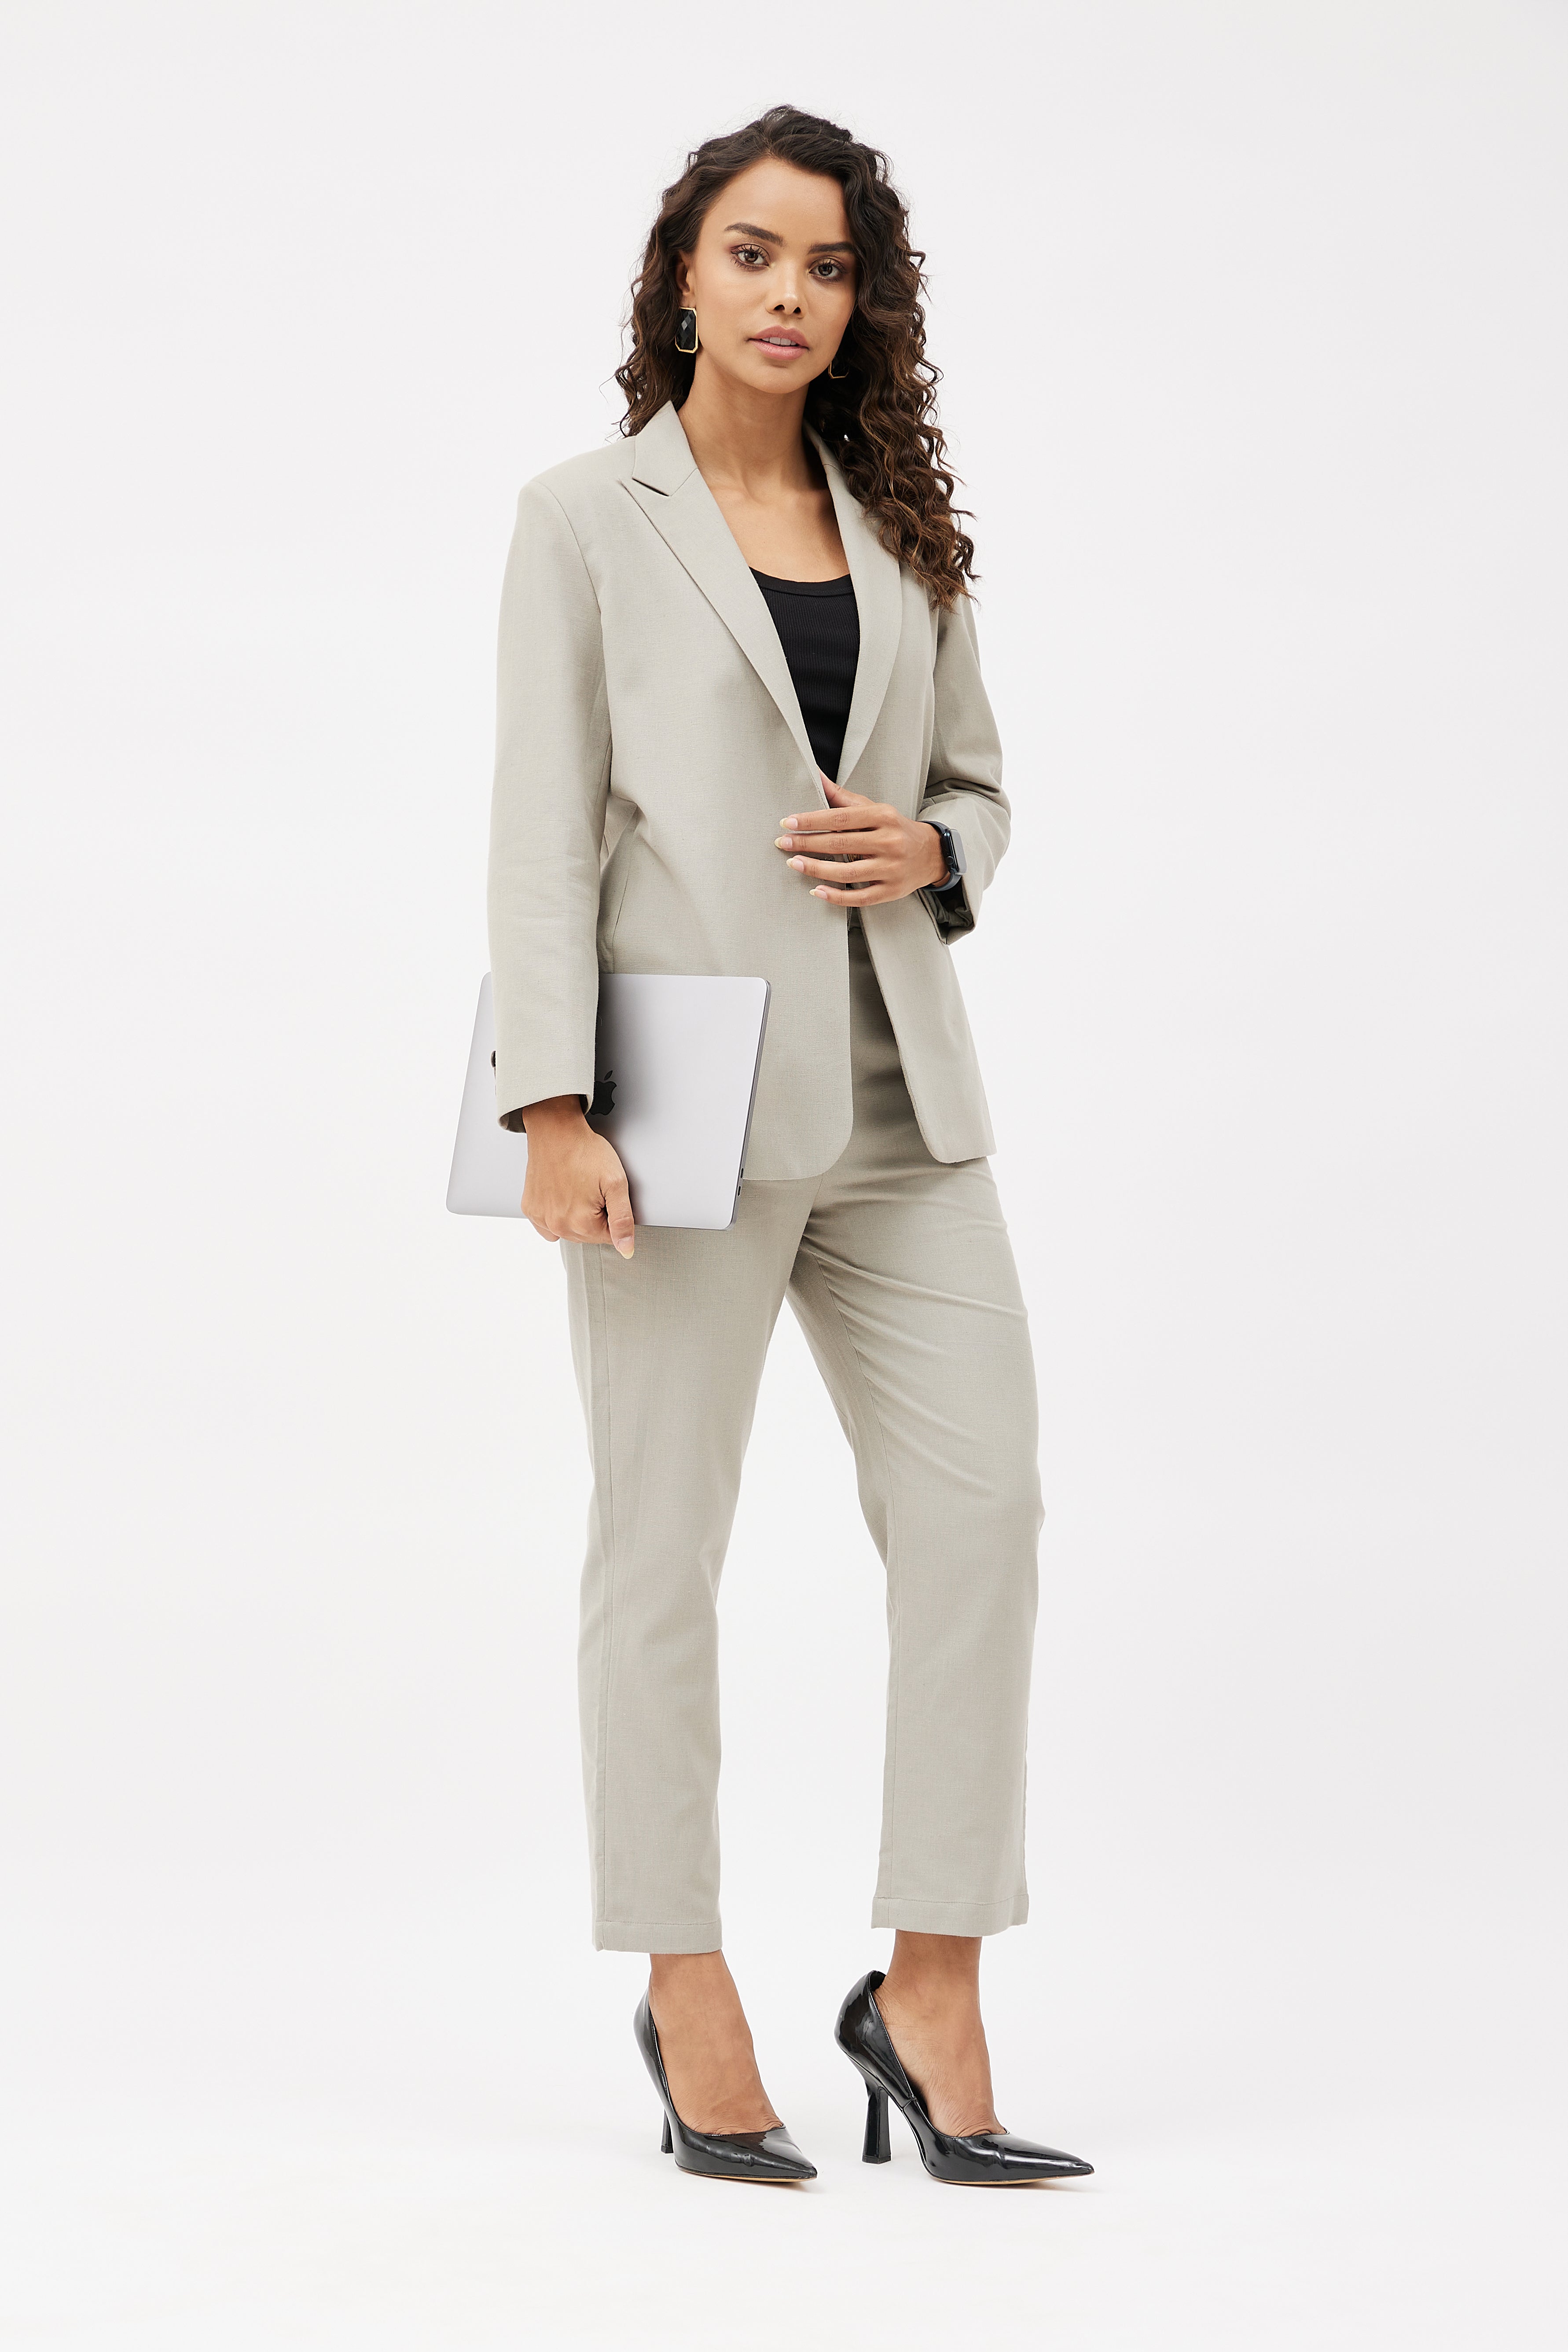 Buy AKS Women Cream Coloured Printed Blazers With Trousers  Co Ords for  Women 6600867  Myntra